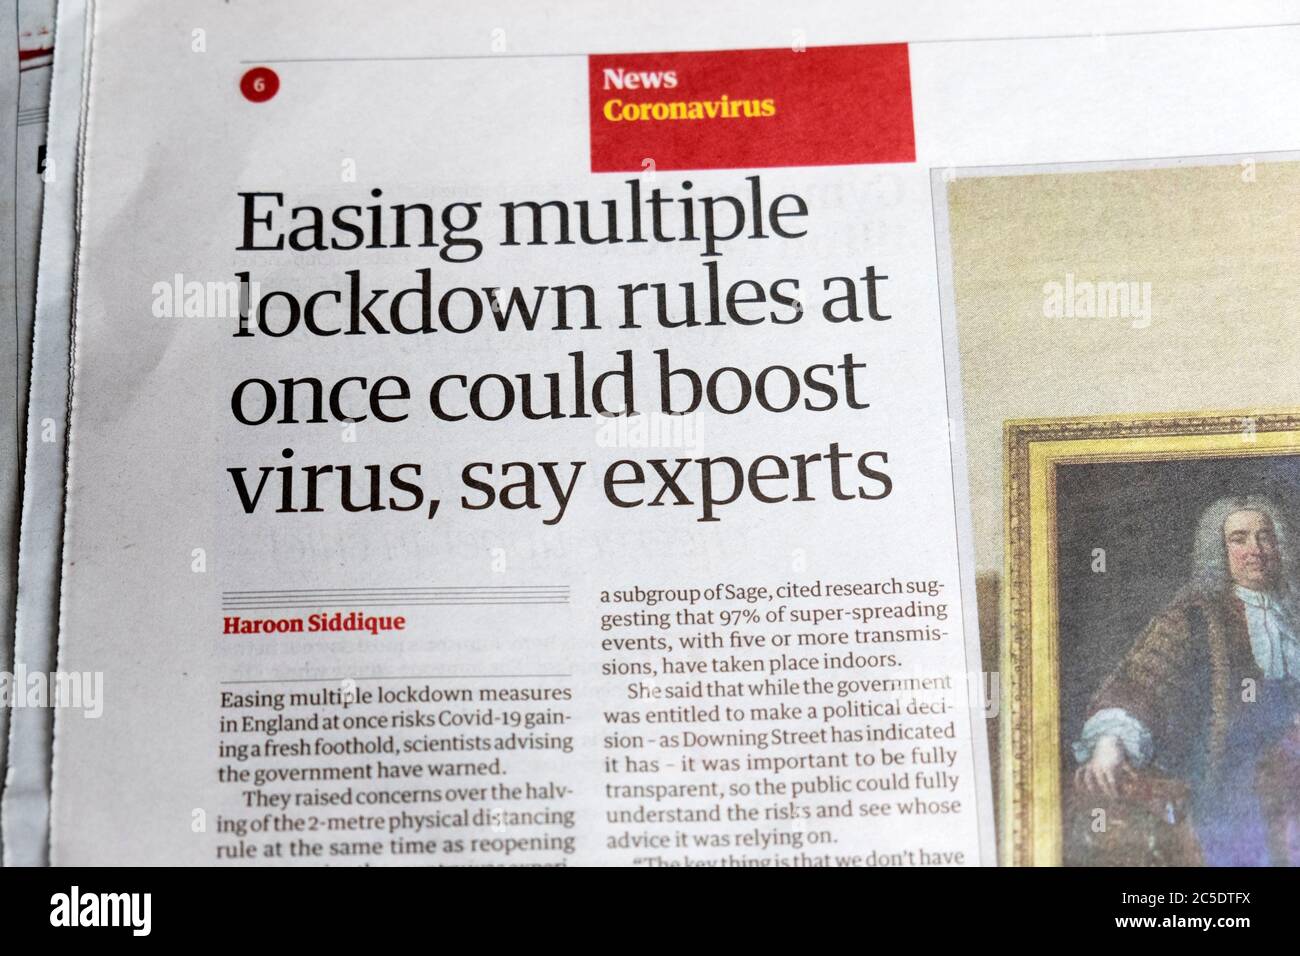 'Easing multiple lockdown rules at once could boost virus, say experts' newspaper headline in Guardian newspaper Coronavirus section 24 June 2020 Stock Photo